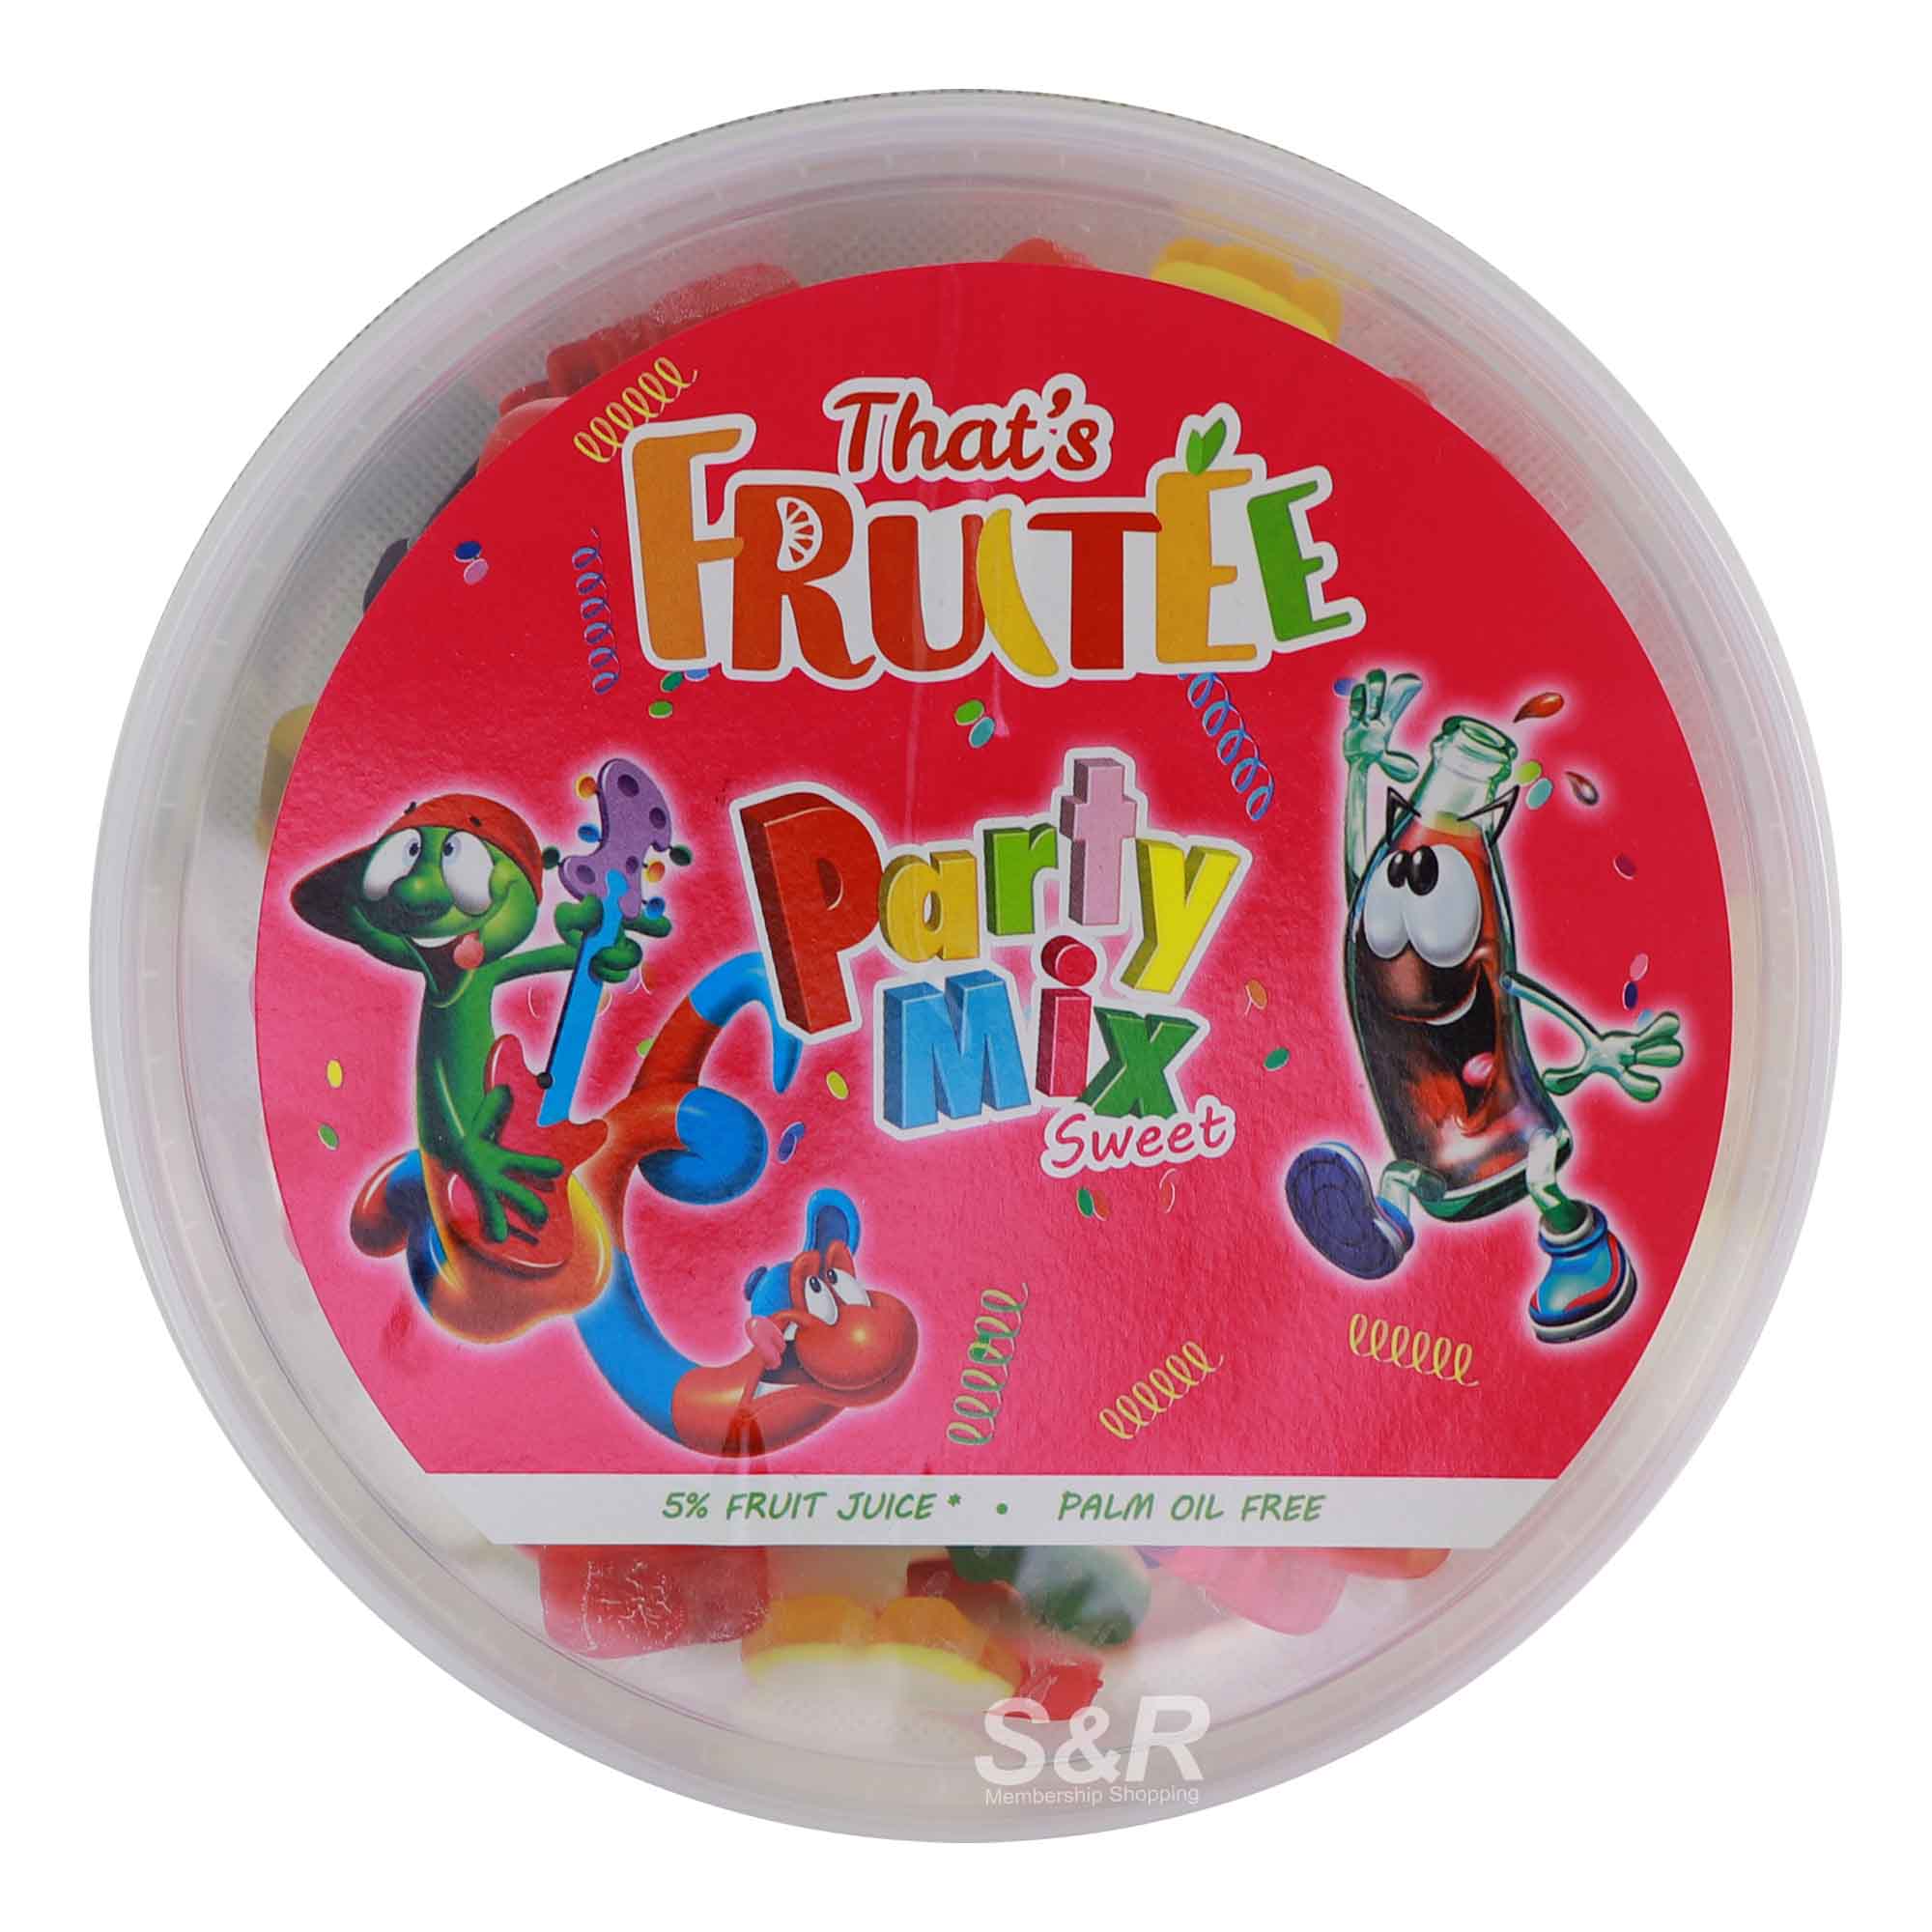 That's Fruitee Party Mix Sweet Gummy Candy 500g